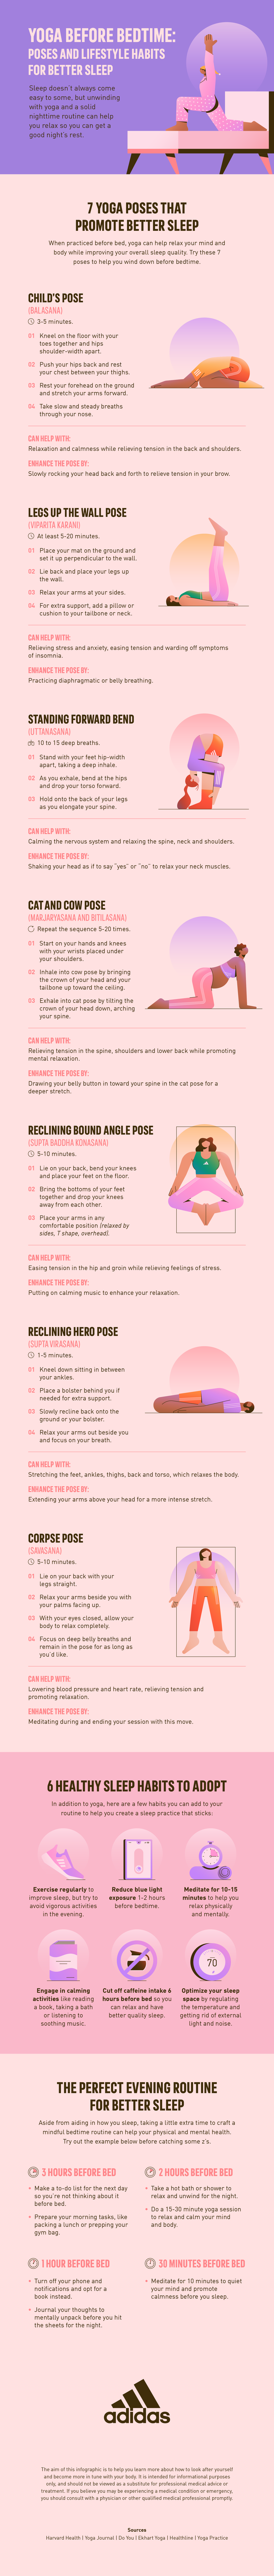 Bedtime Yoga for Better Sleep: A 10-Pose Routine to Try